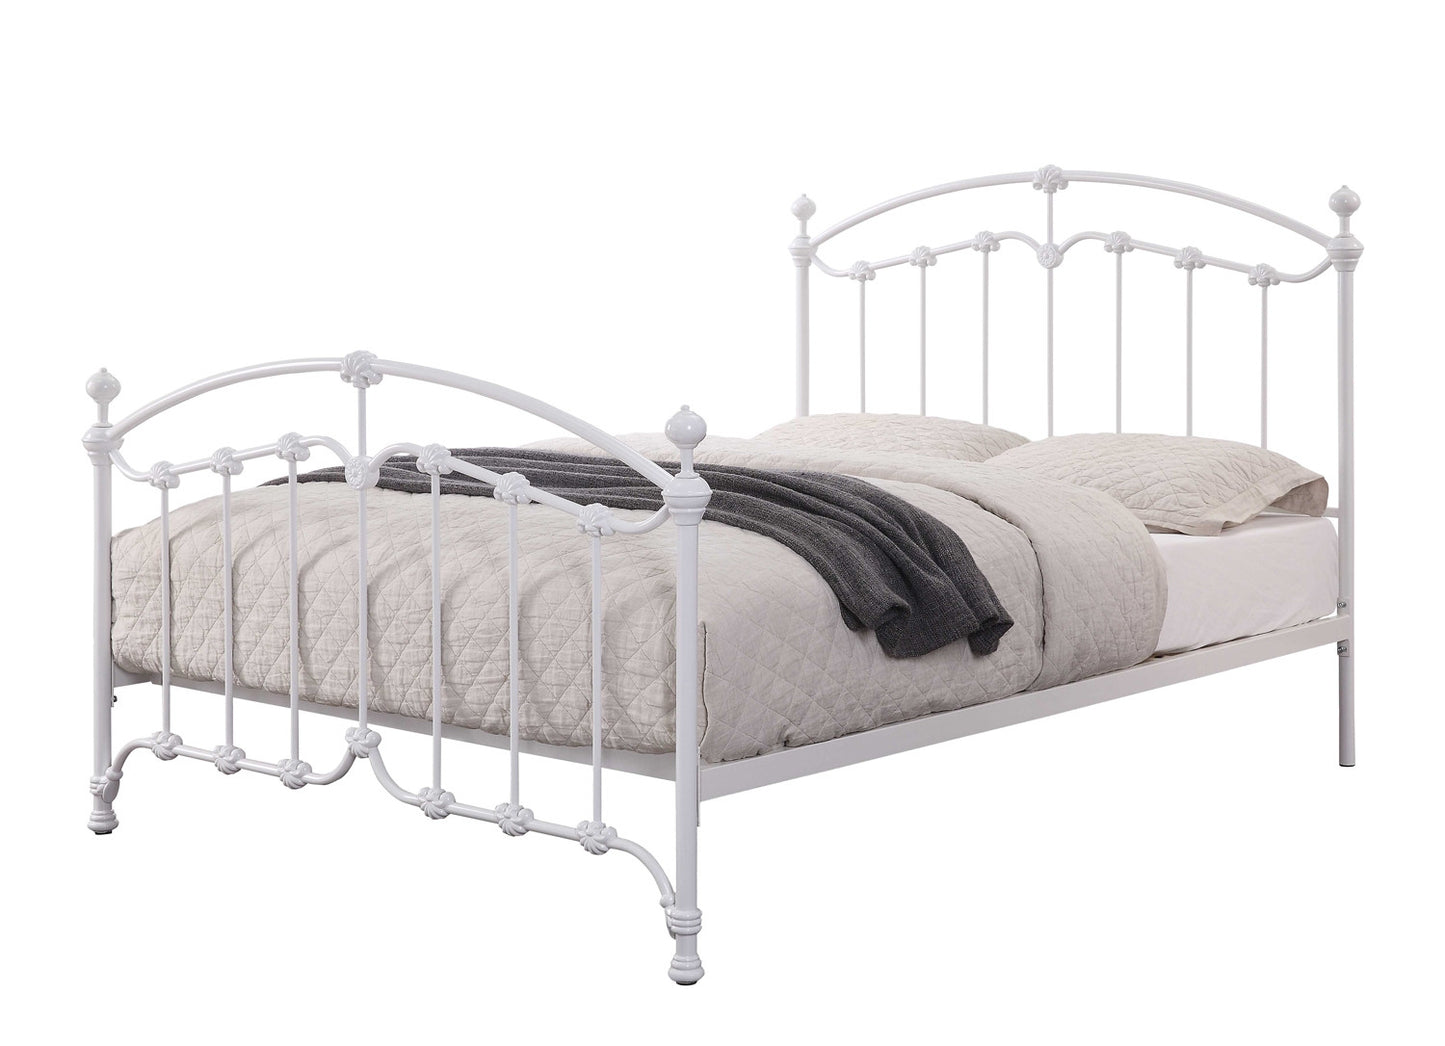 KATRINA WHITE Double Size Cast and Wrought Iron Bed